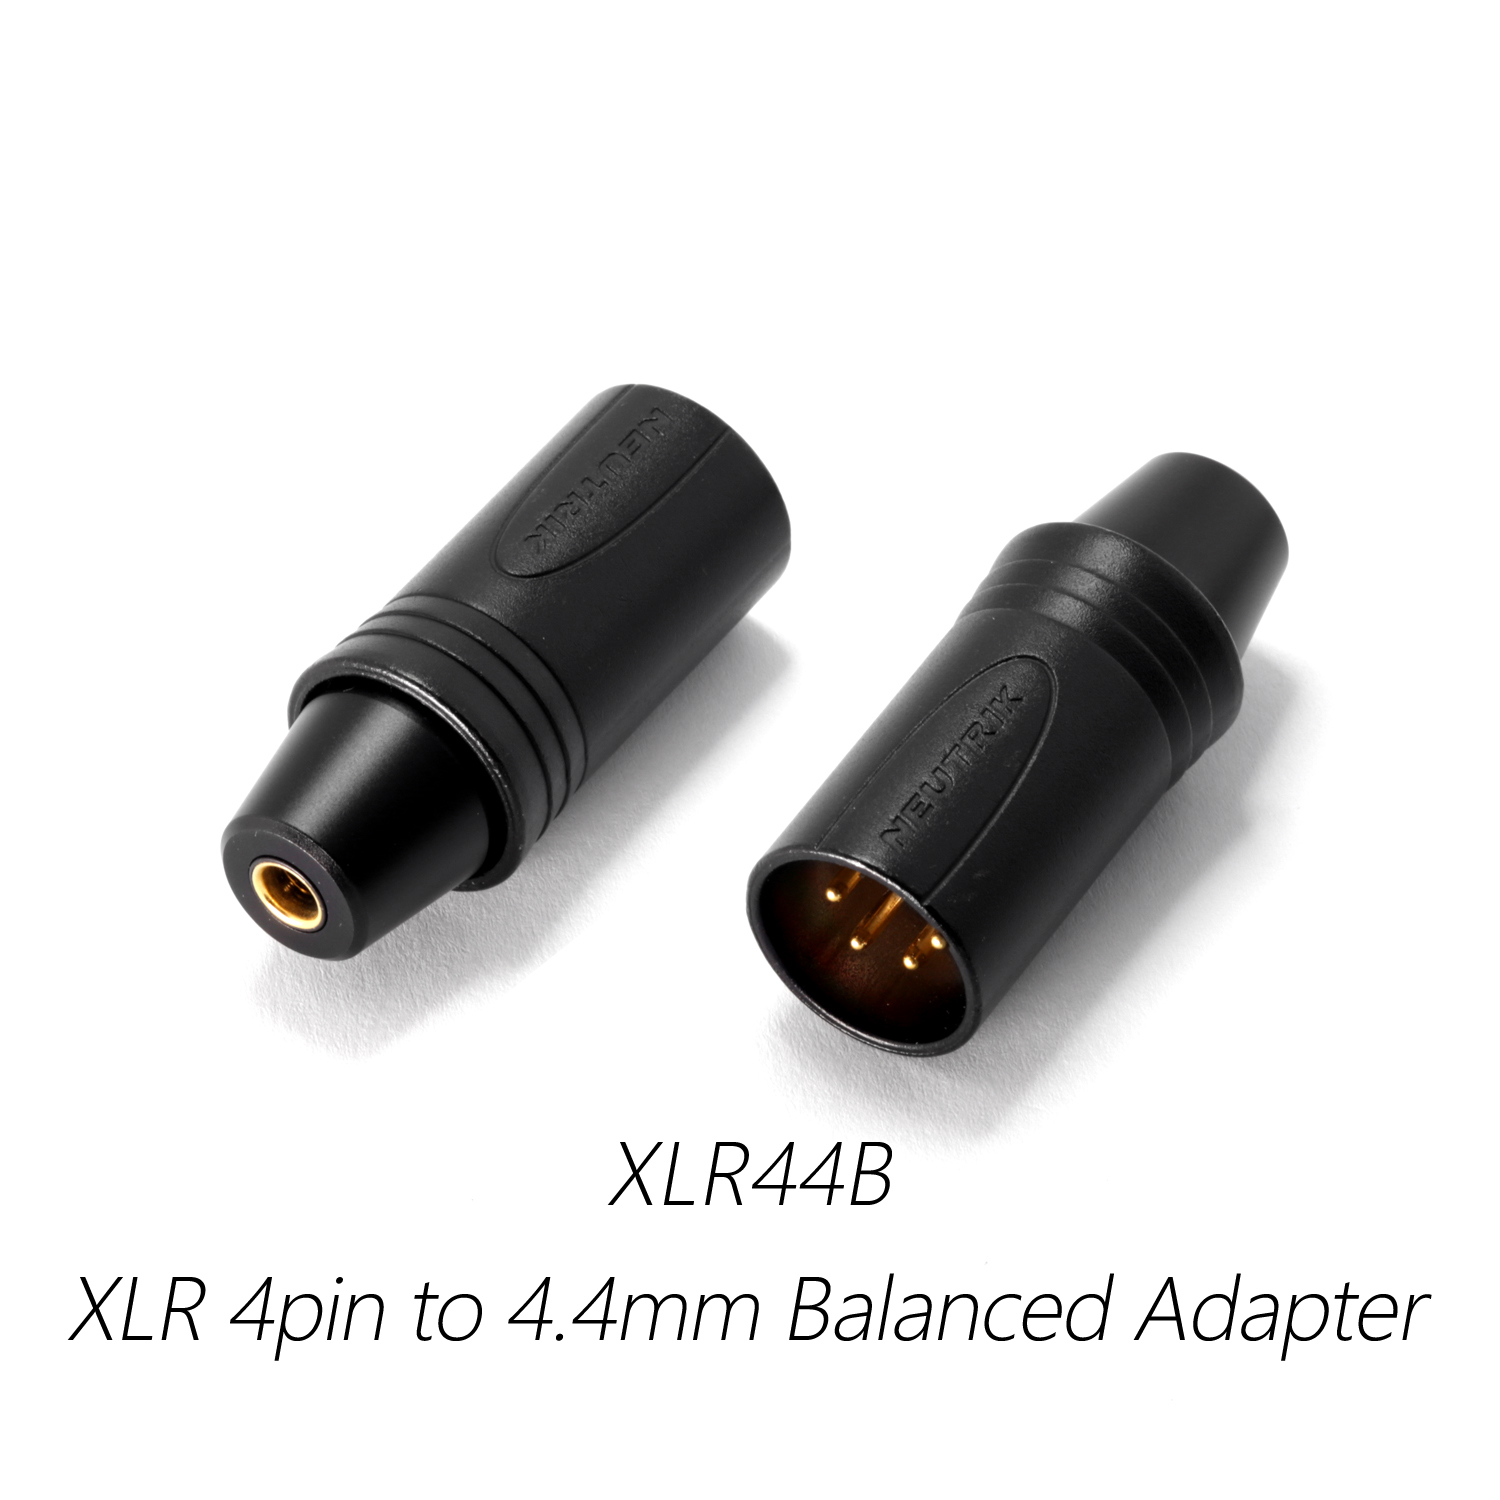 DD ddHiFi XLR44B balanced 4pin to 4.4mm balanced adapter for headphones and amplifiers